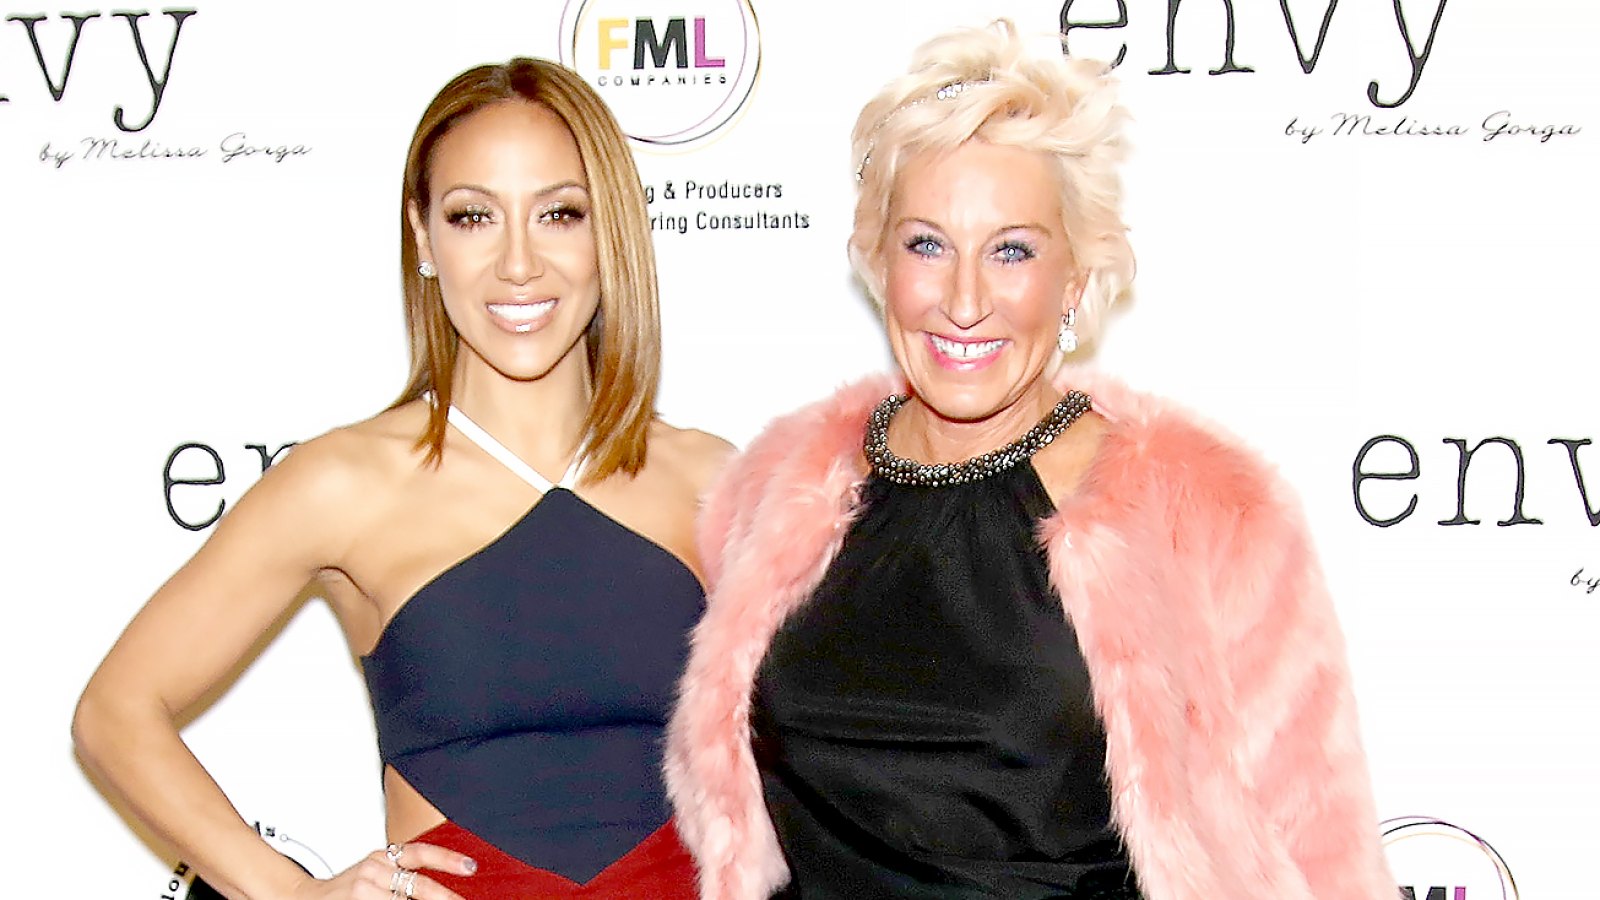 Melissa Gorga (L) and Jackie Beard Robinson attend the grand opening of envy by Melissa Gorga Boutique at envy by Melissa Gorga Boutique on January 14, 2016 in Montclair, New Jersey.